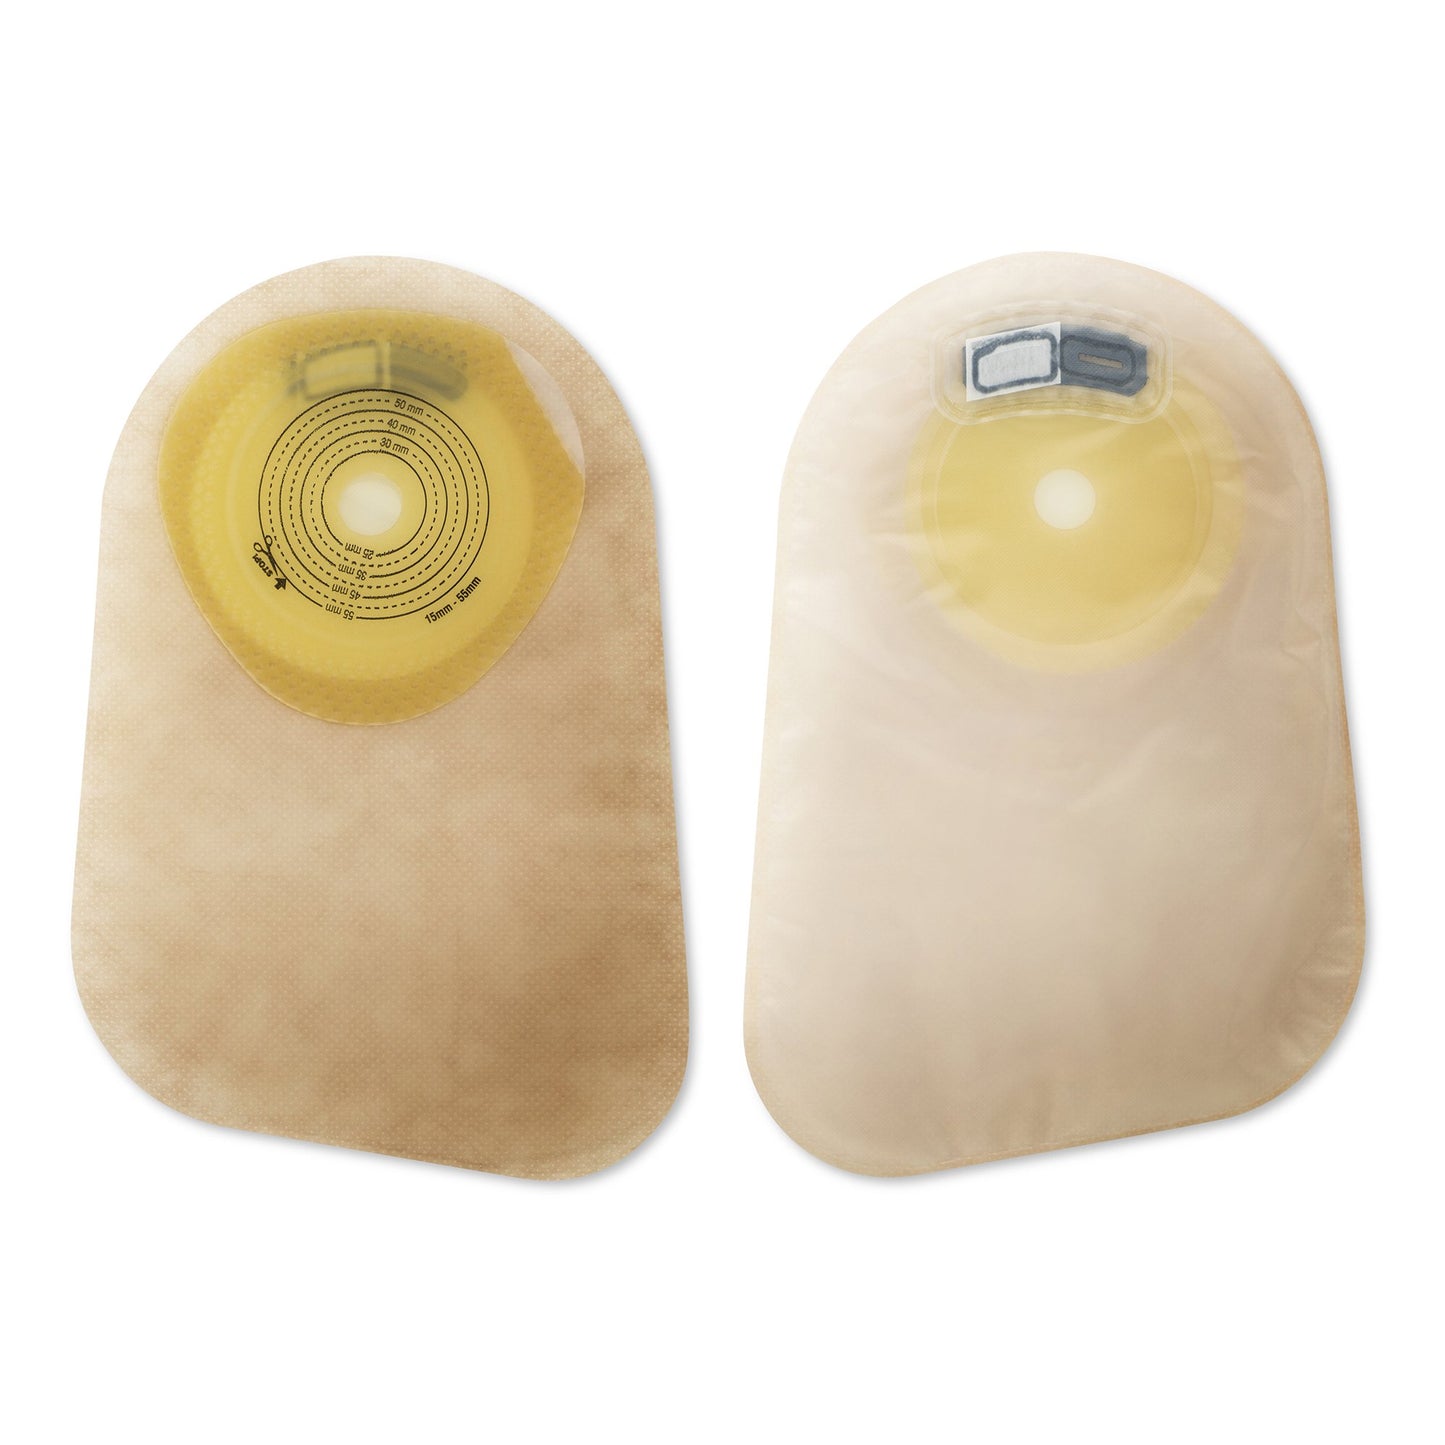 Premier™ One-Piece Closed End Transparent Colostomy Pouch, 9 Inch Length, 5/8 to 2-1/8 Inch Stoma, 30 ct